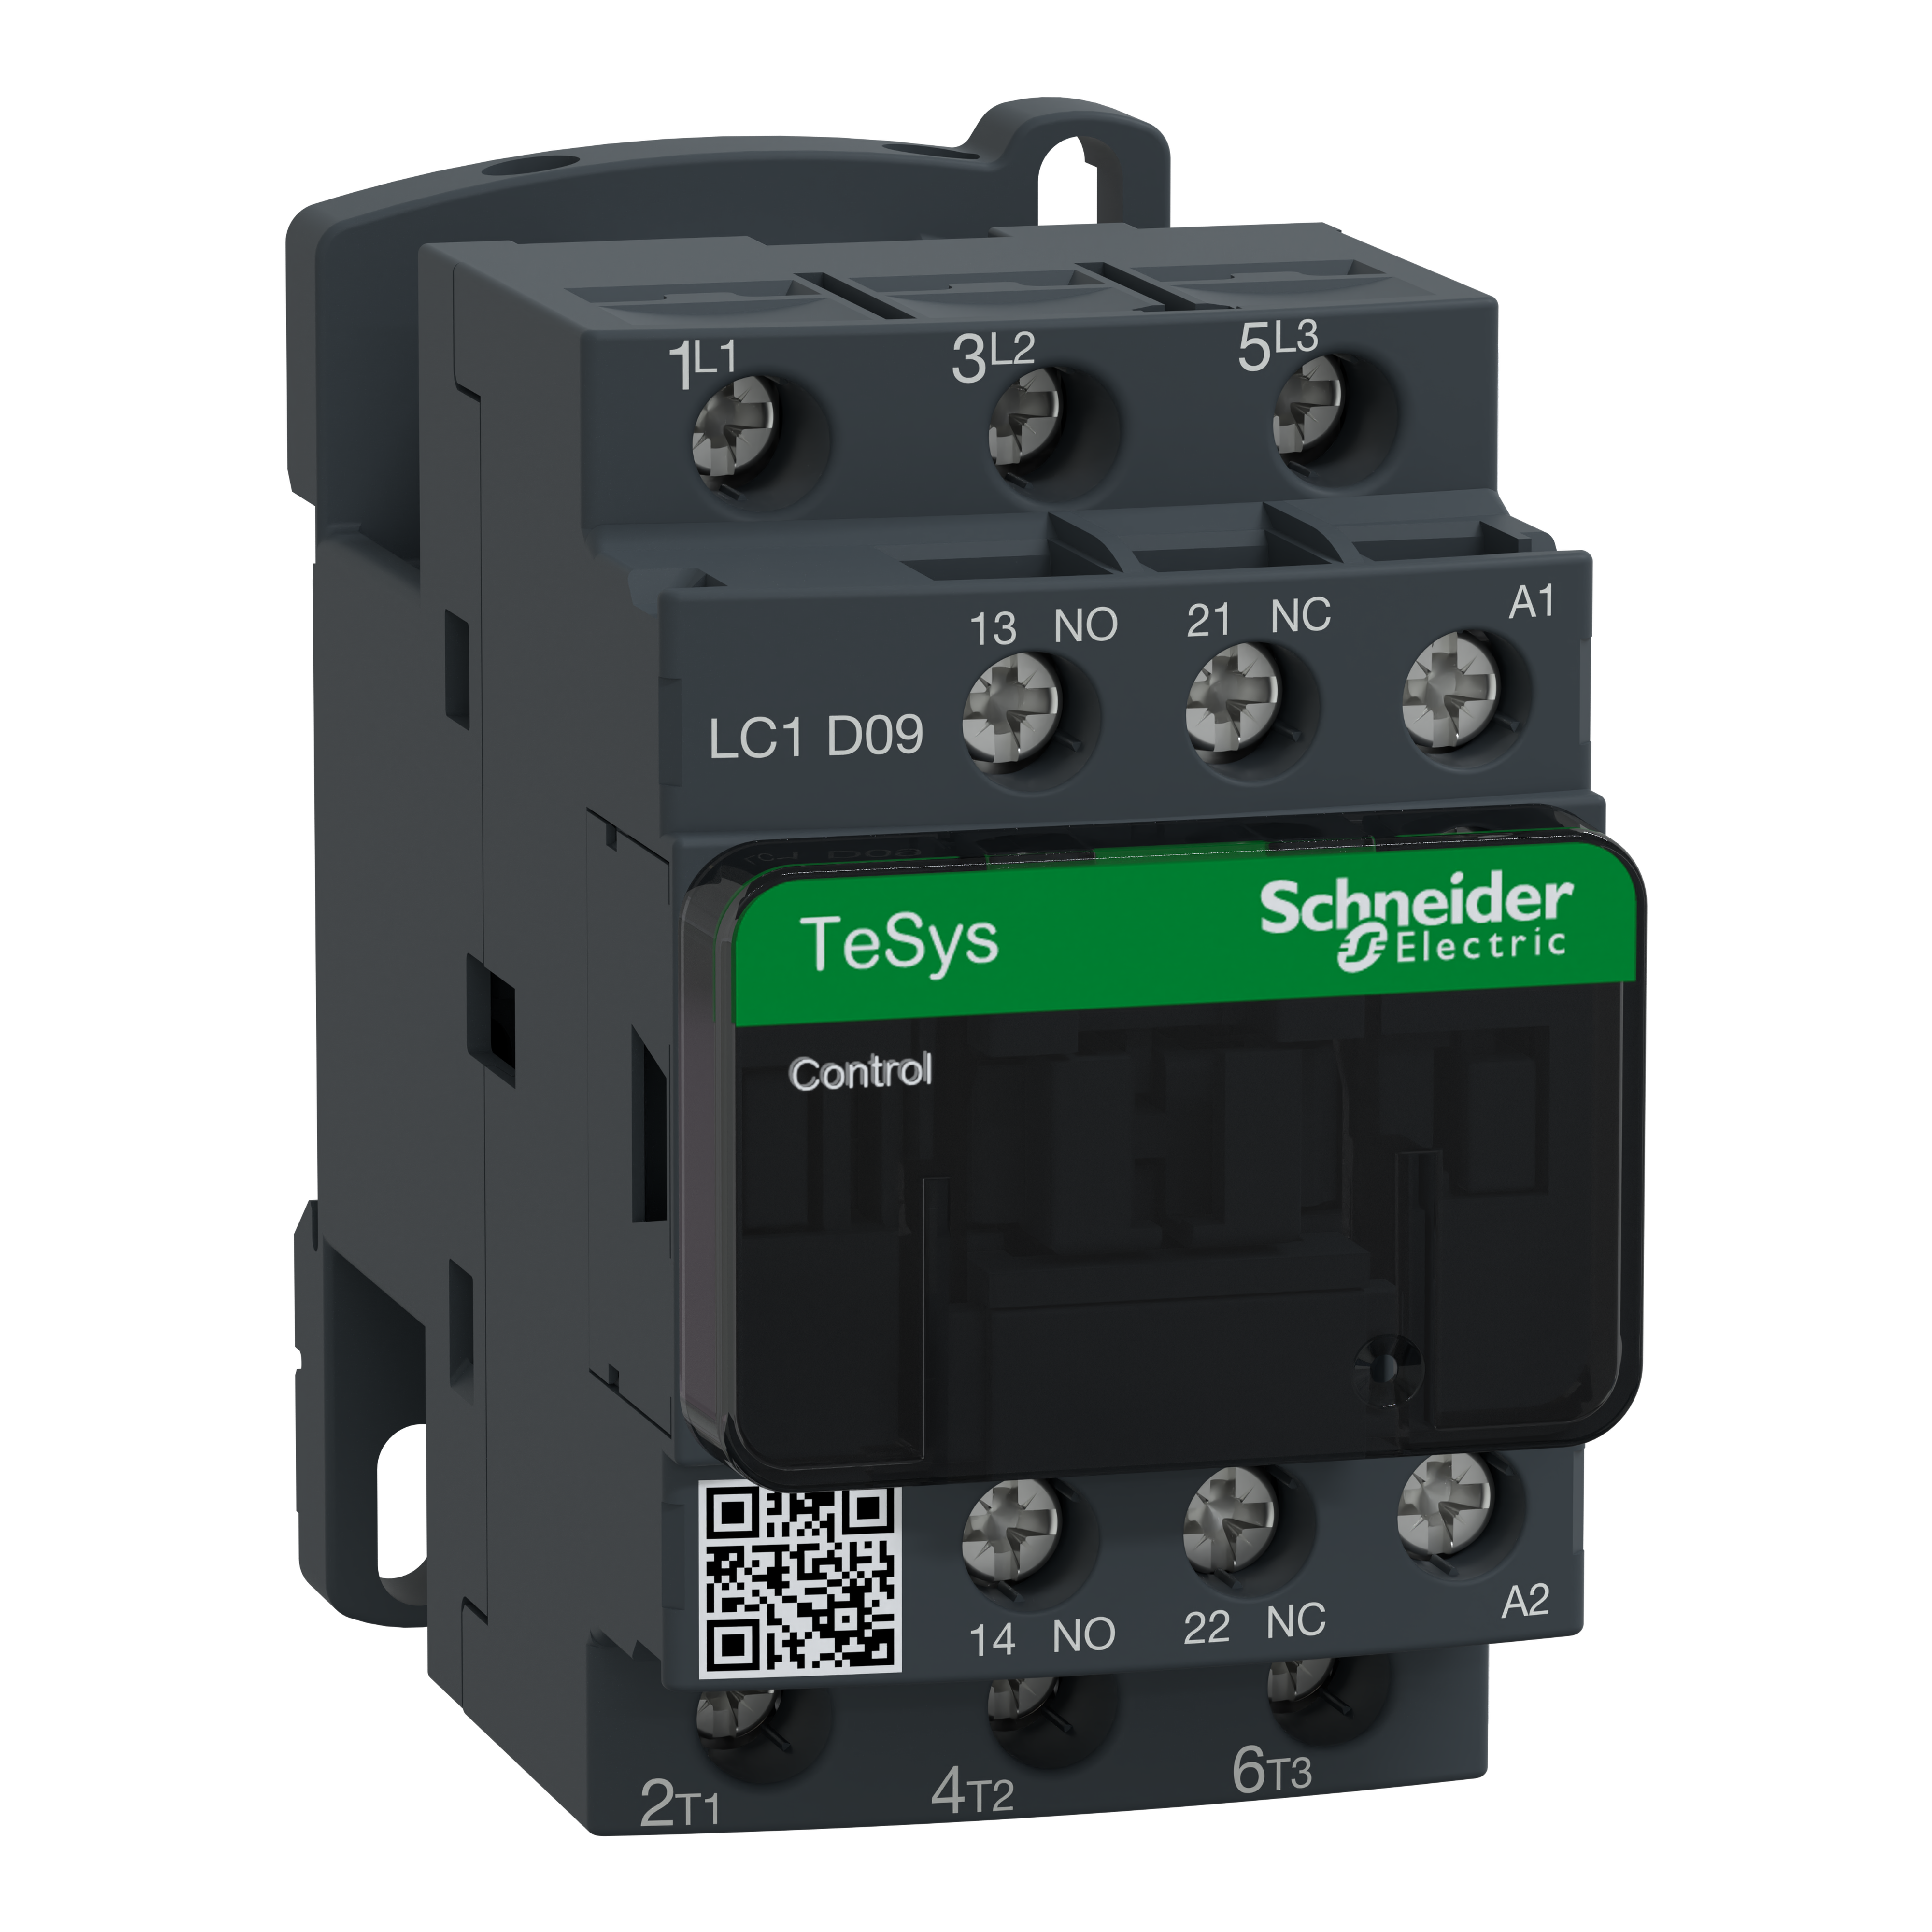 IEC contactor, TeSys Deca, nonreversing, 9A, 5HP at 480VAC, up to 100kA SCCR, 3 phase, 3 NO, 120VAC 50/60Hz coil, open style